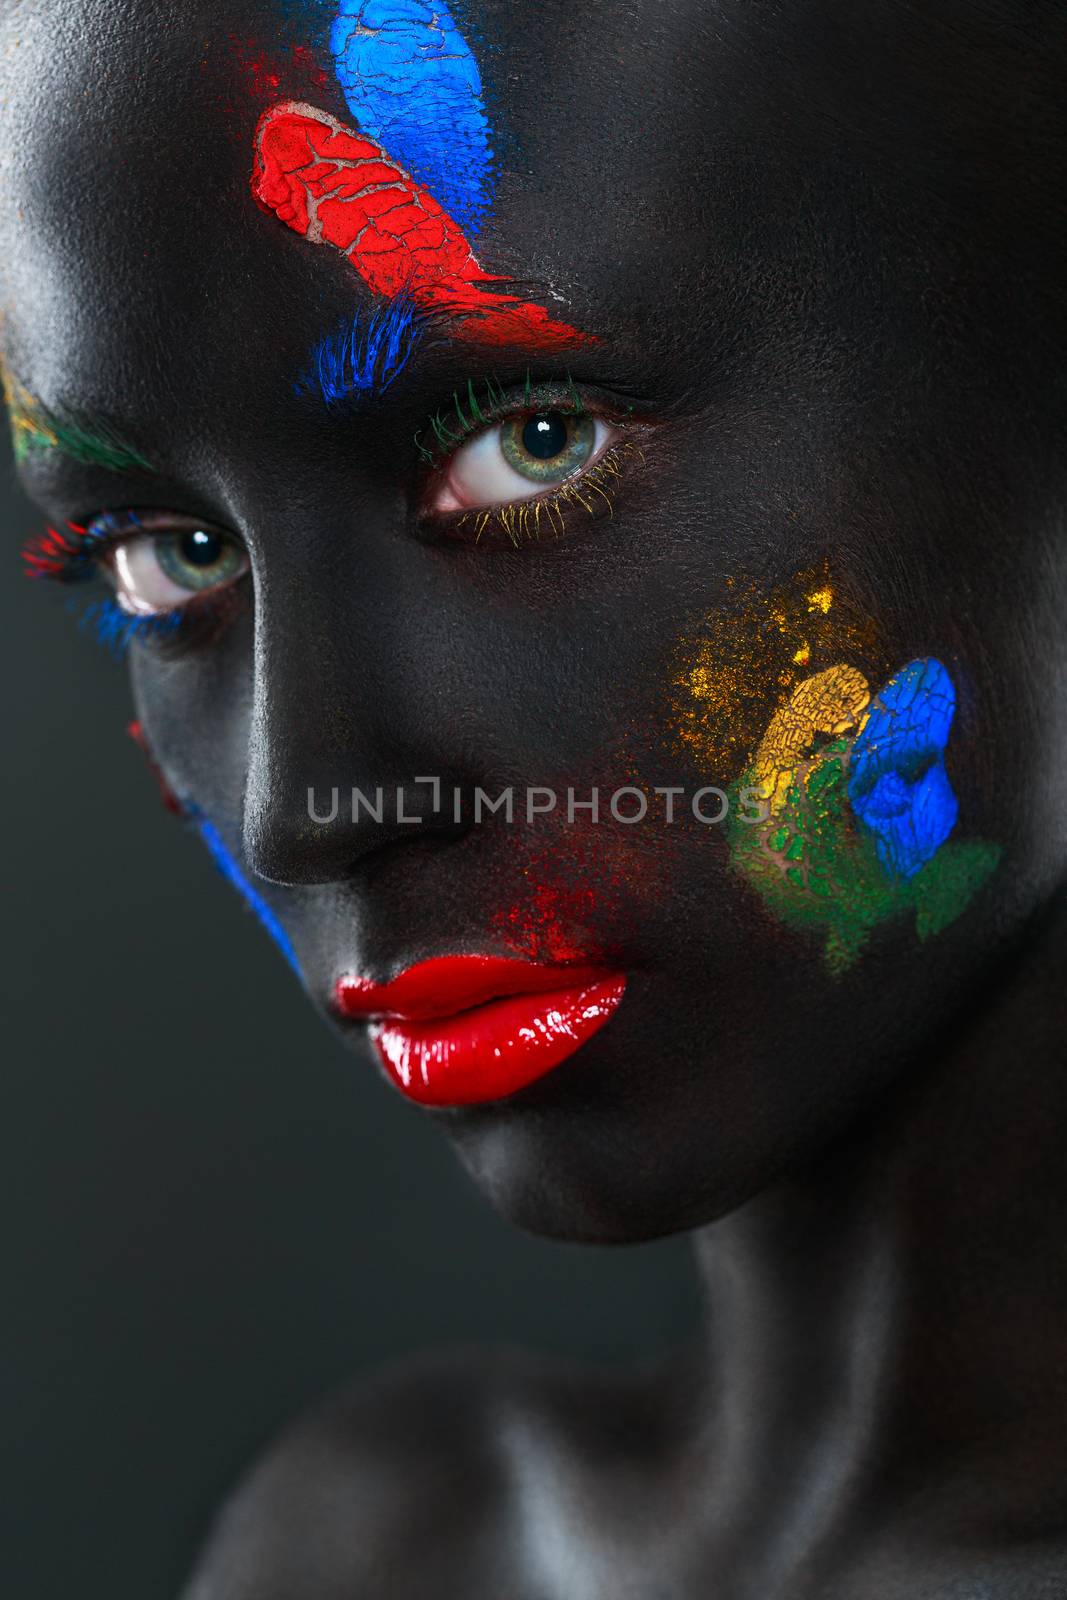 Creative makeup - Portrait of a beautiful woman with black face